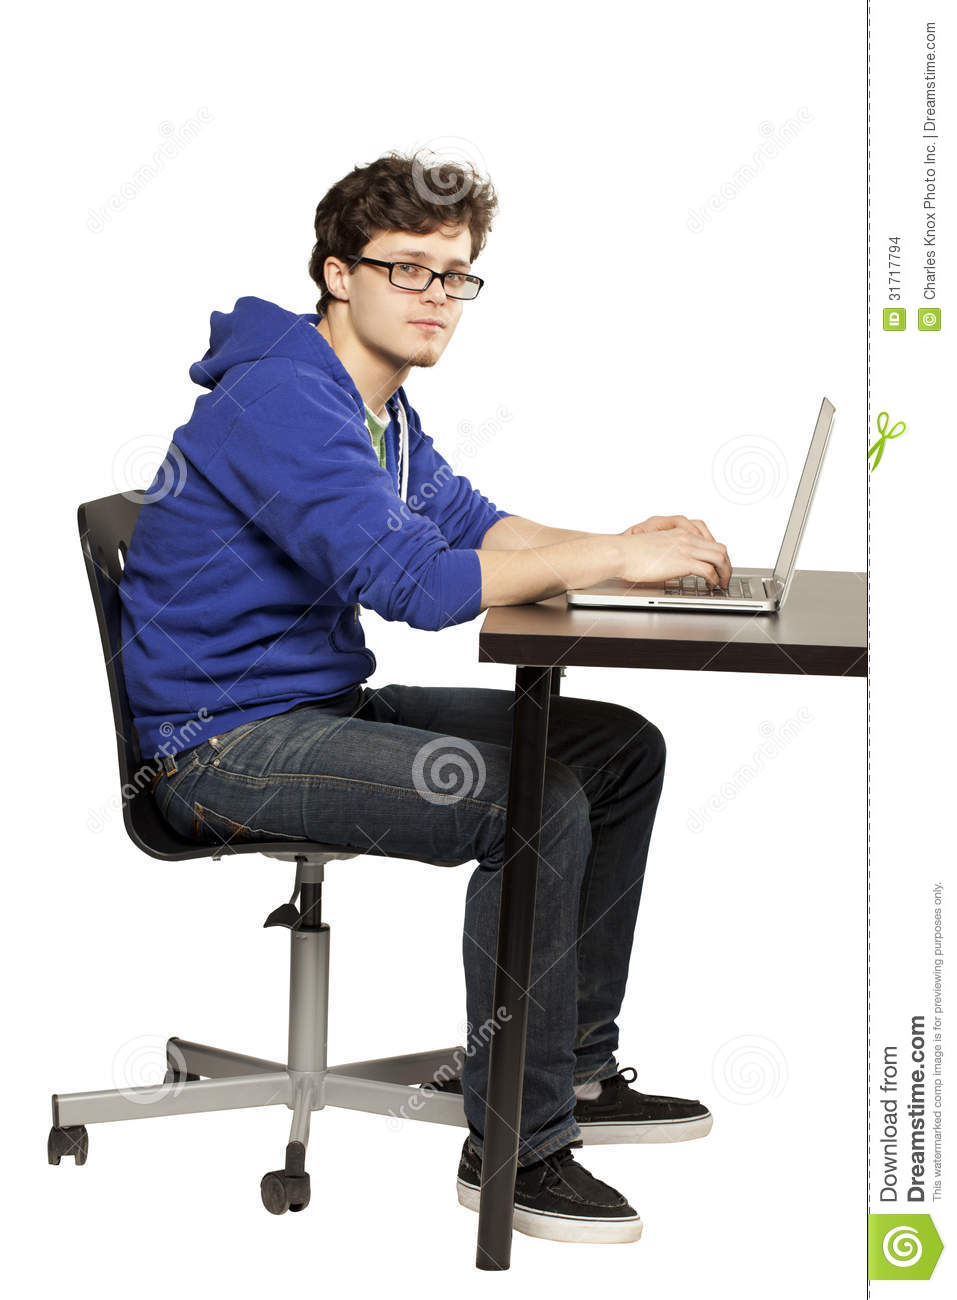 Student Sitting At Table Using Computer Stock Images   Image  31717794